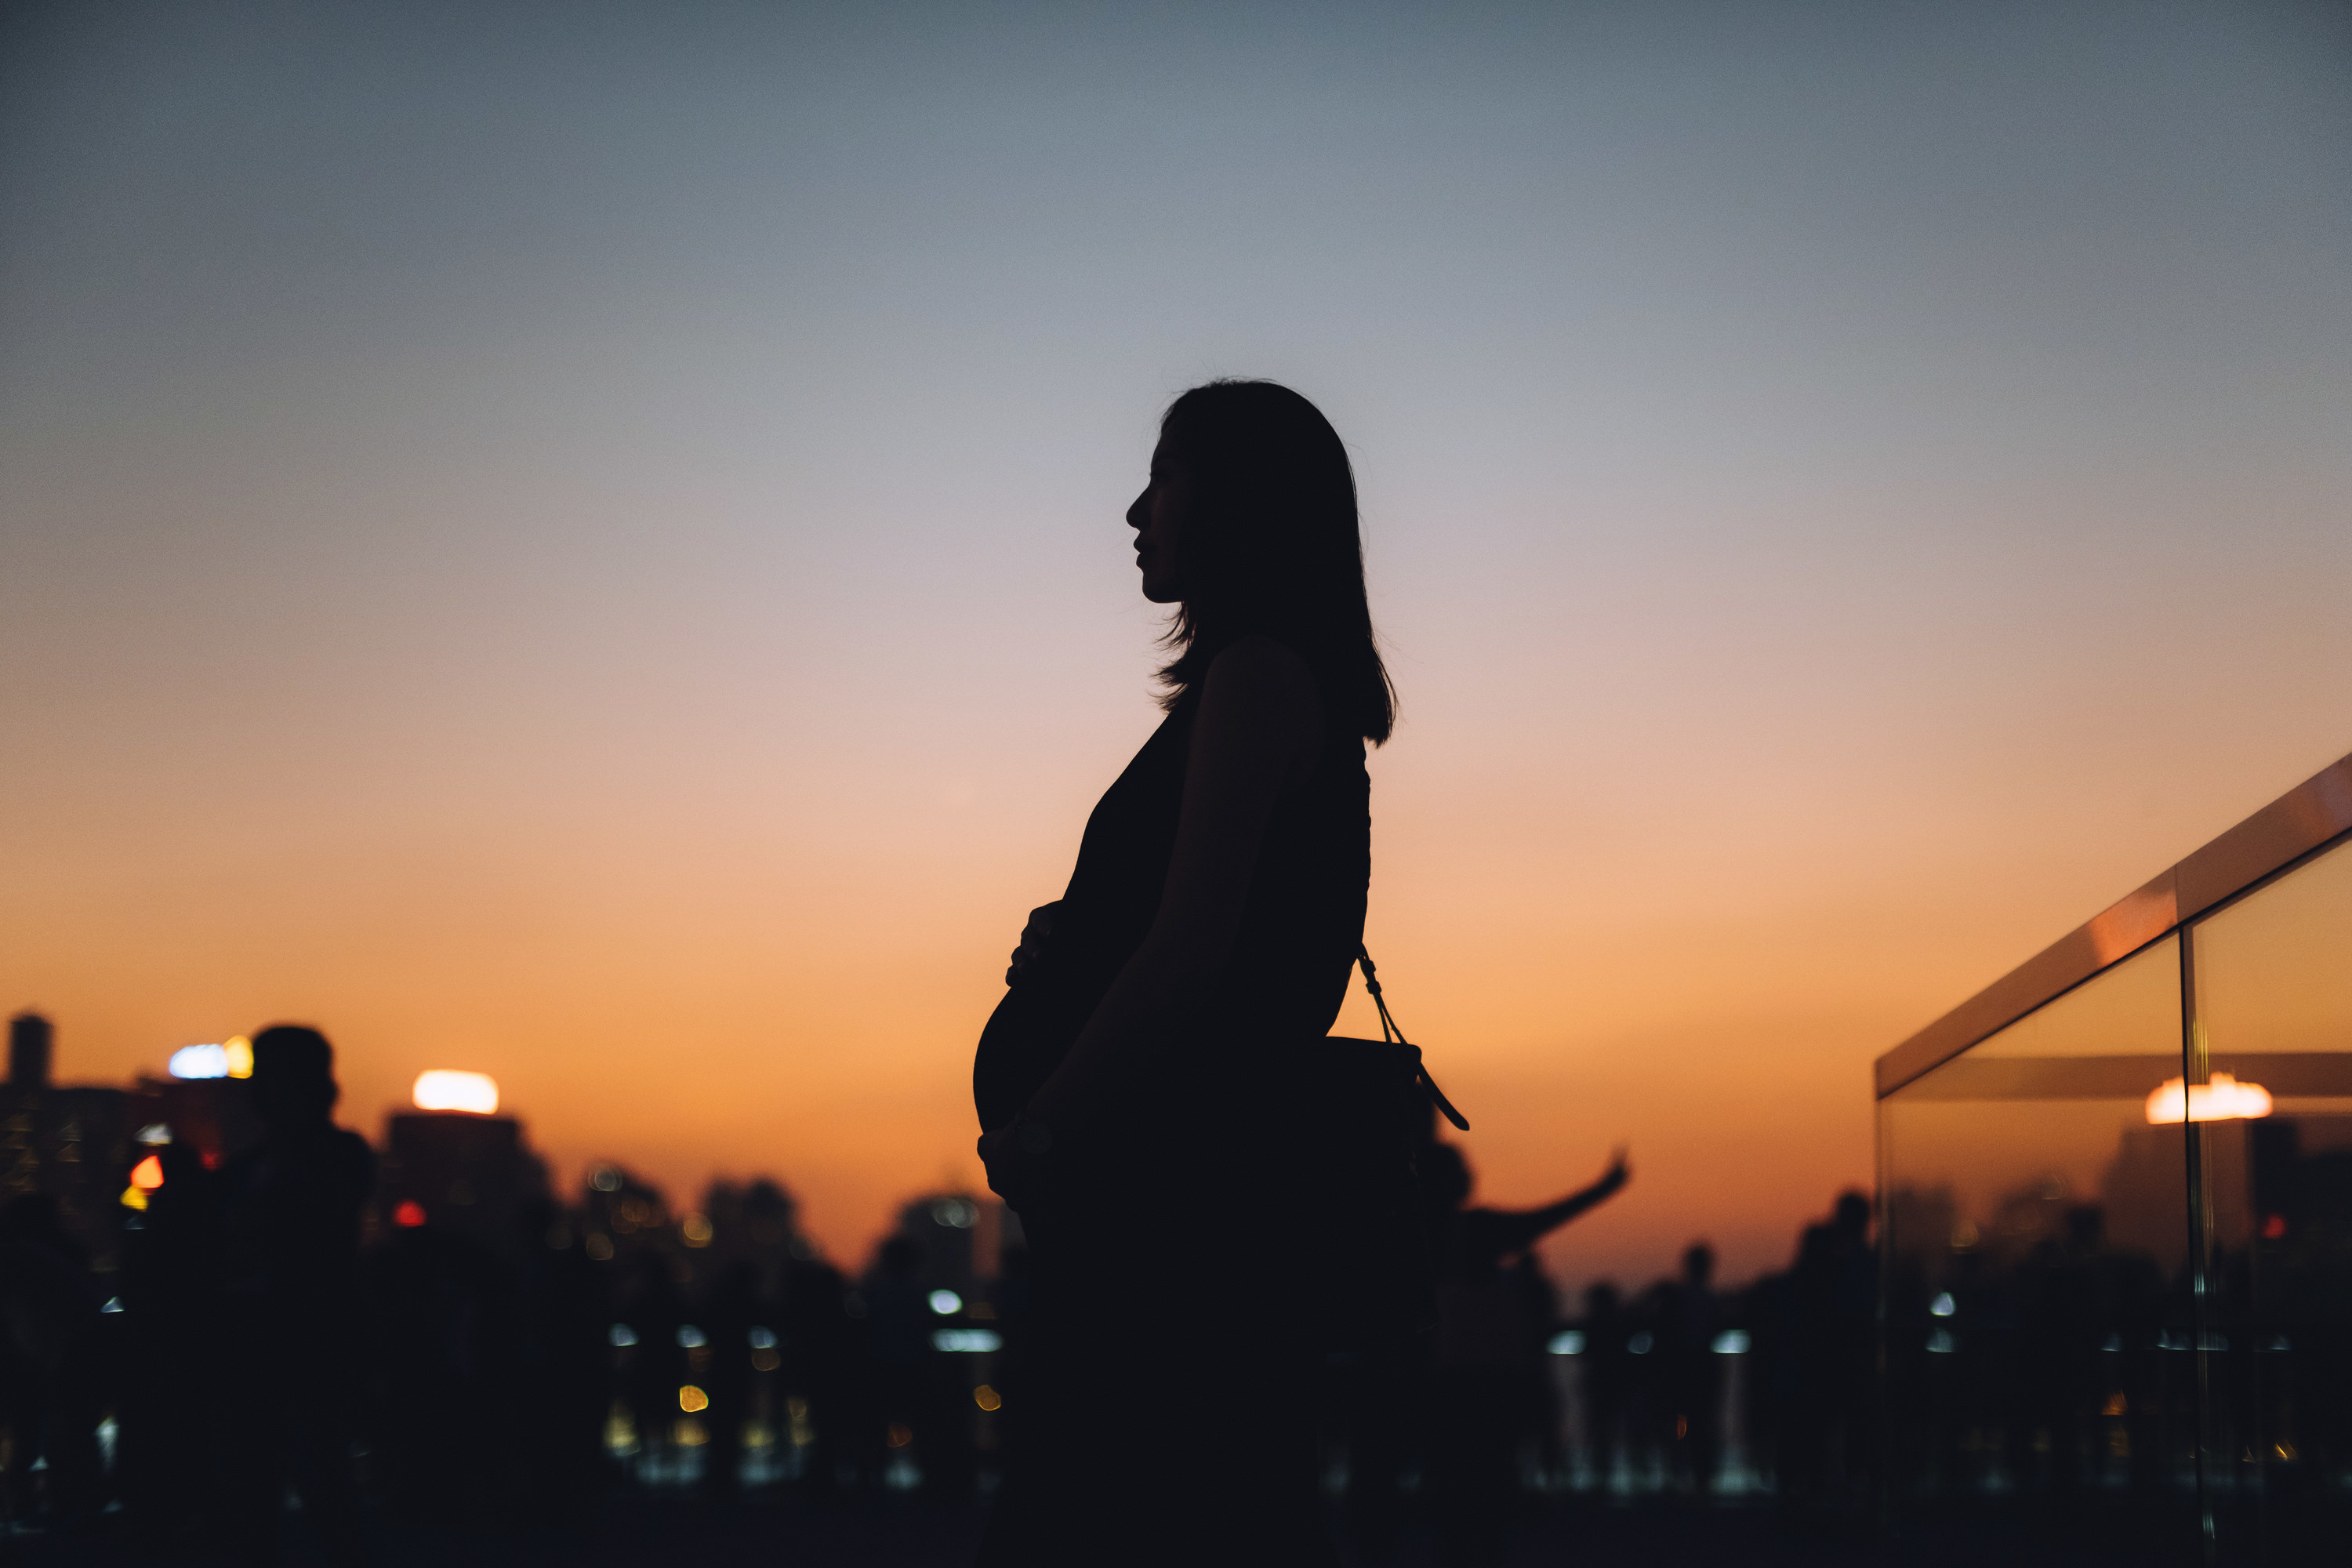 An image of a woman holding her pregnant stomach in front of a setting sun